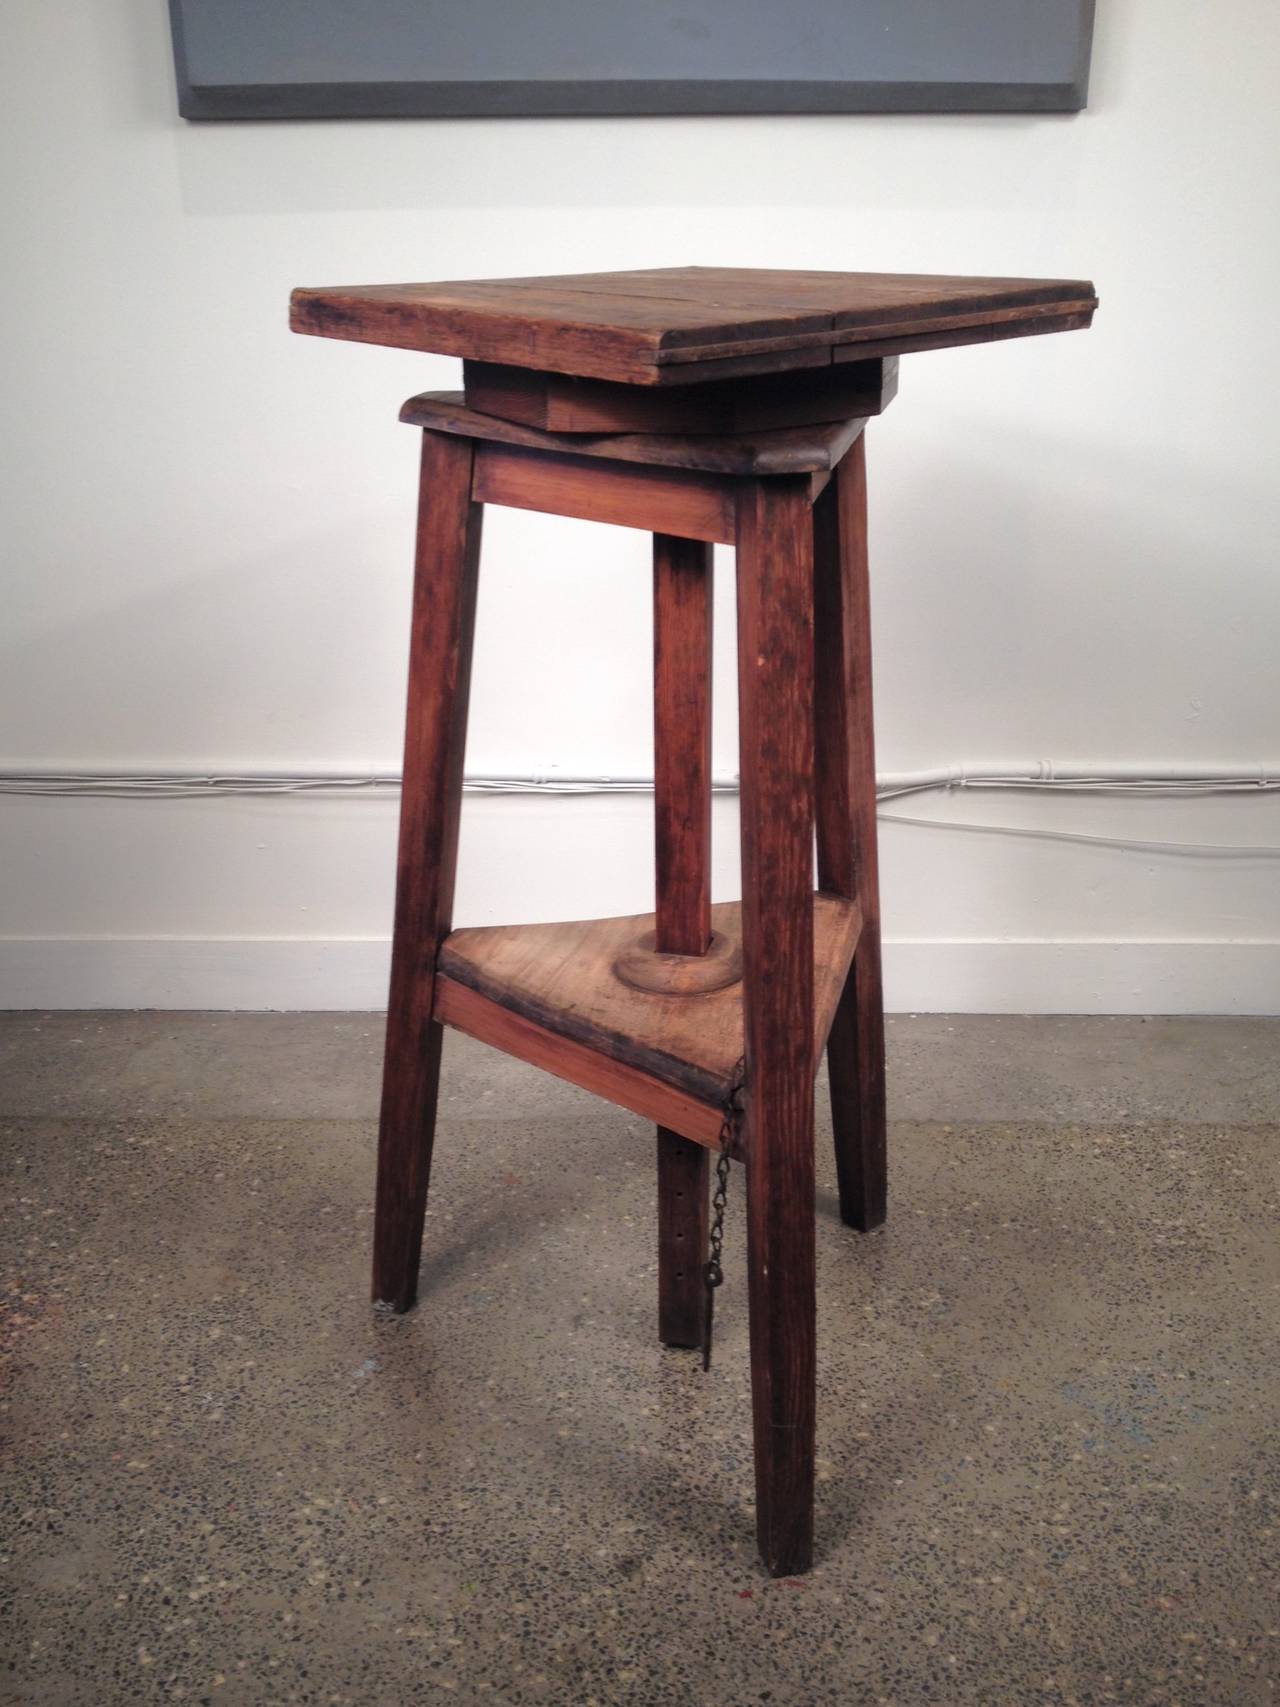 French oak sculptor's stand, adjustable height, revolving top. Can be used as sculpture stand, late 19th century.
Measures: Height 30